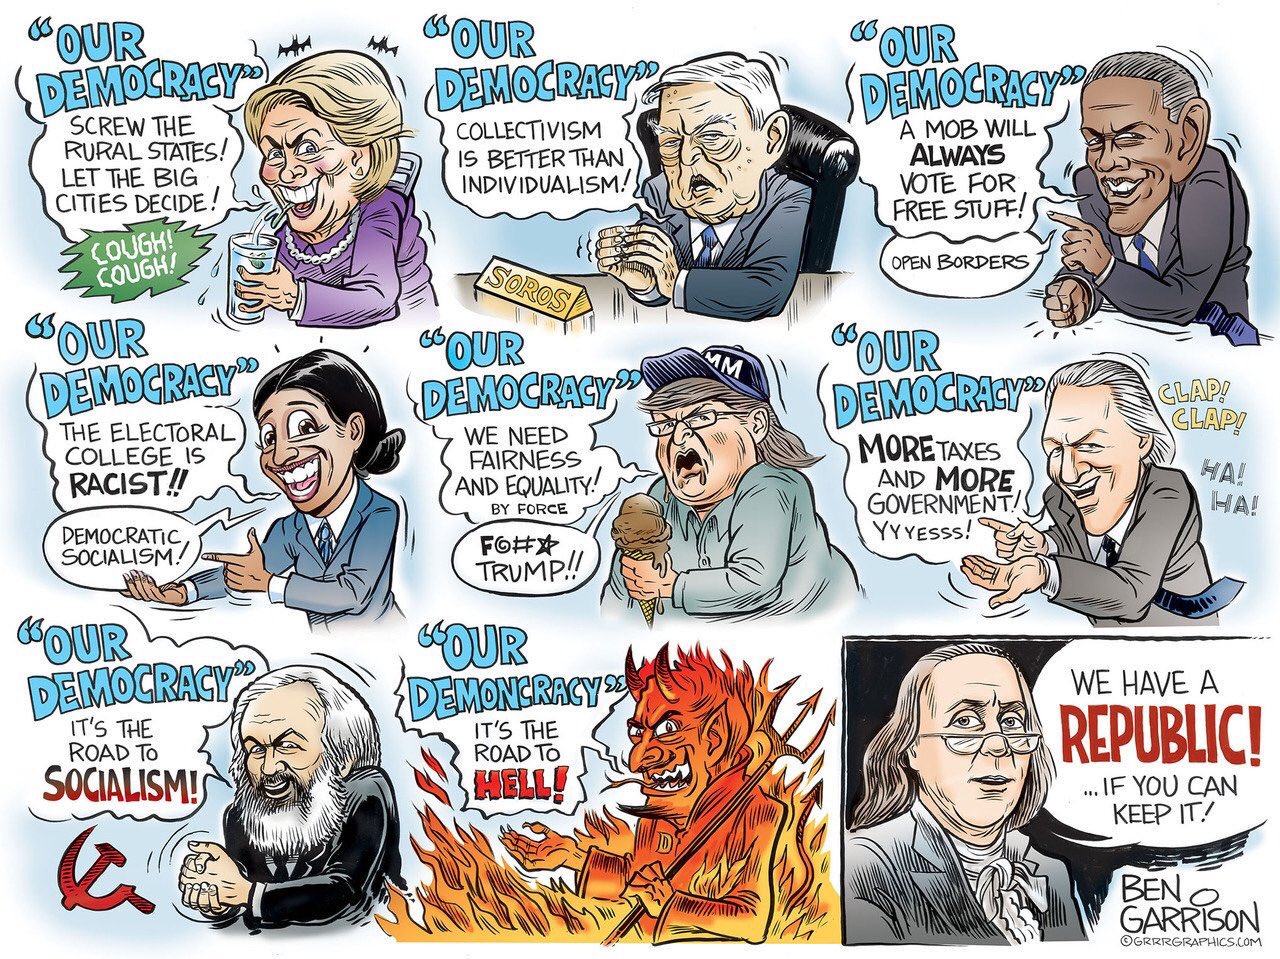 ben garrison our democracy - Kour O Our a Democracy Our Democrasy Collectivism Is Better Than Individualism! Sdemocracy Screw The Rural States! Let The Big Cities Decides A Mob Will Always Vote For Free Stuff! Cough! Open Borders Kour Our Democracy Democr